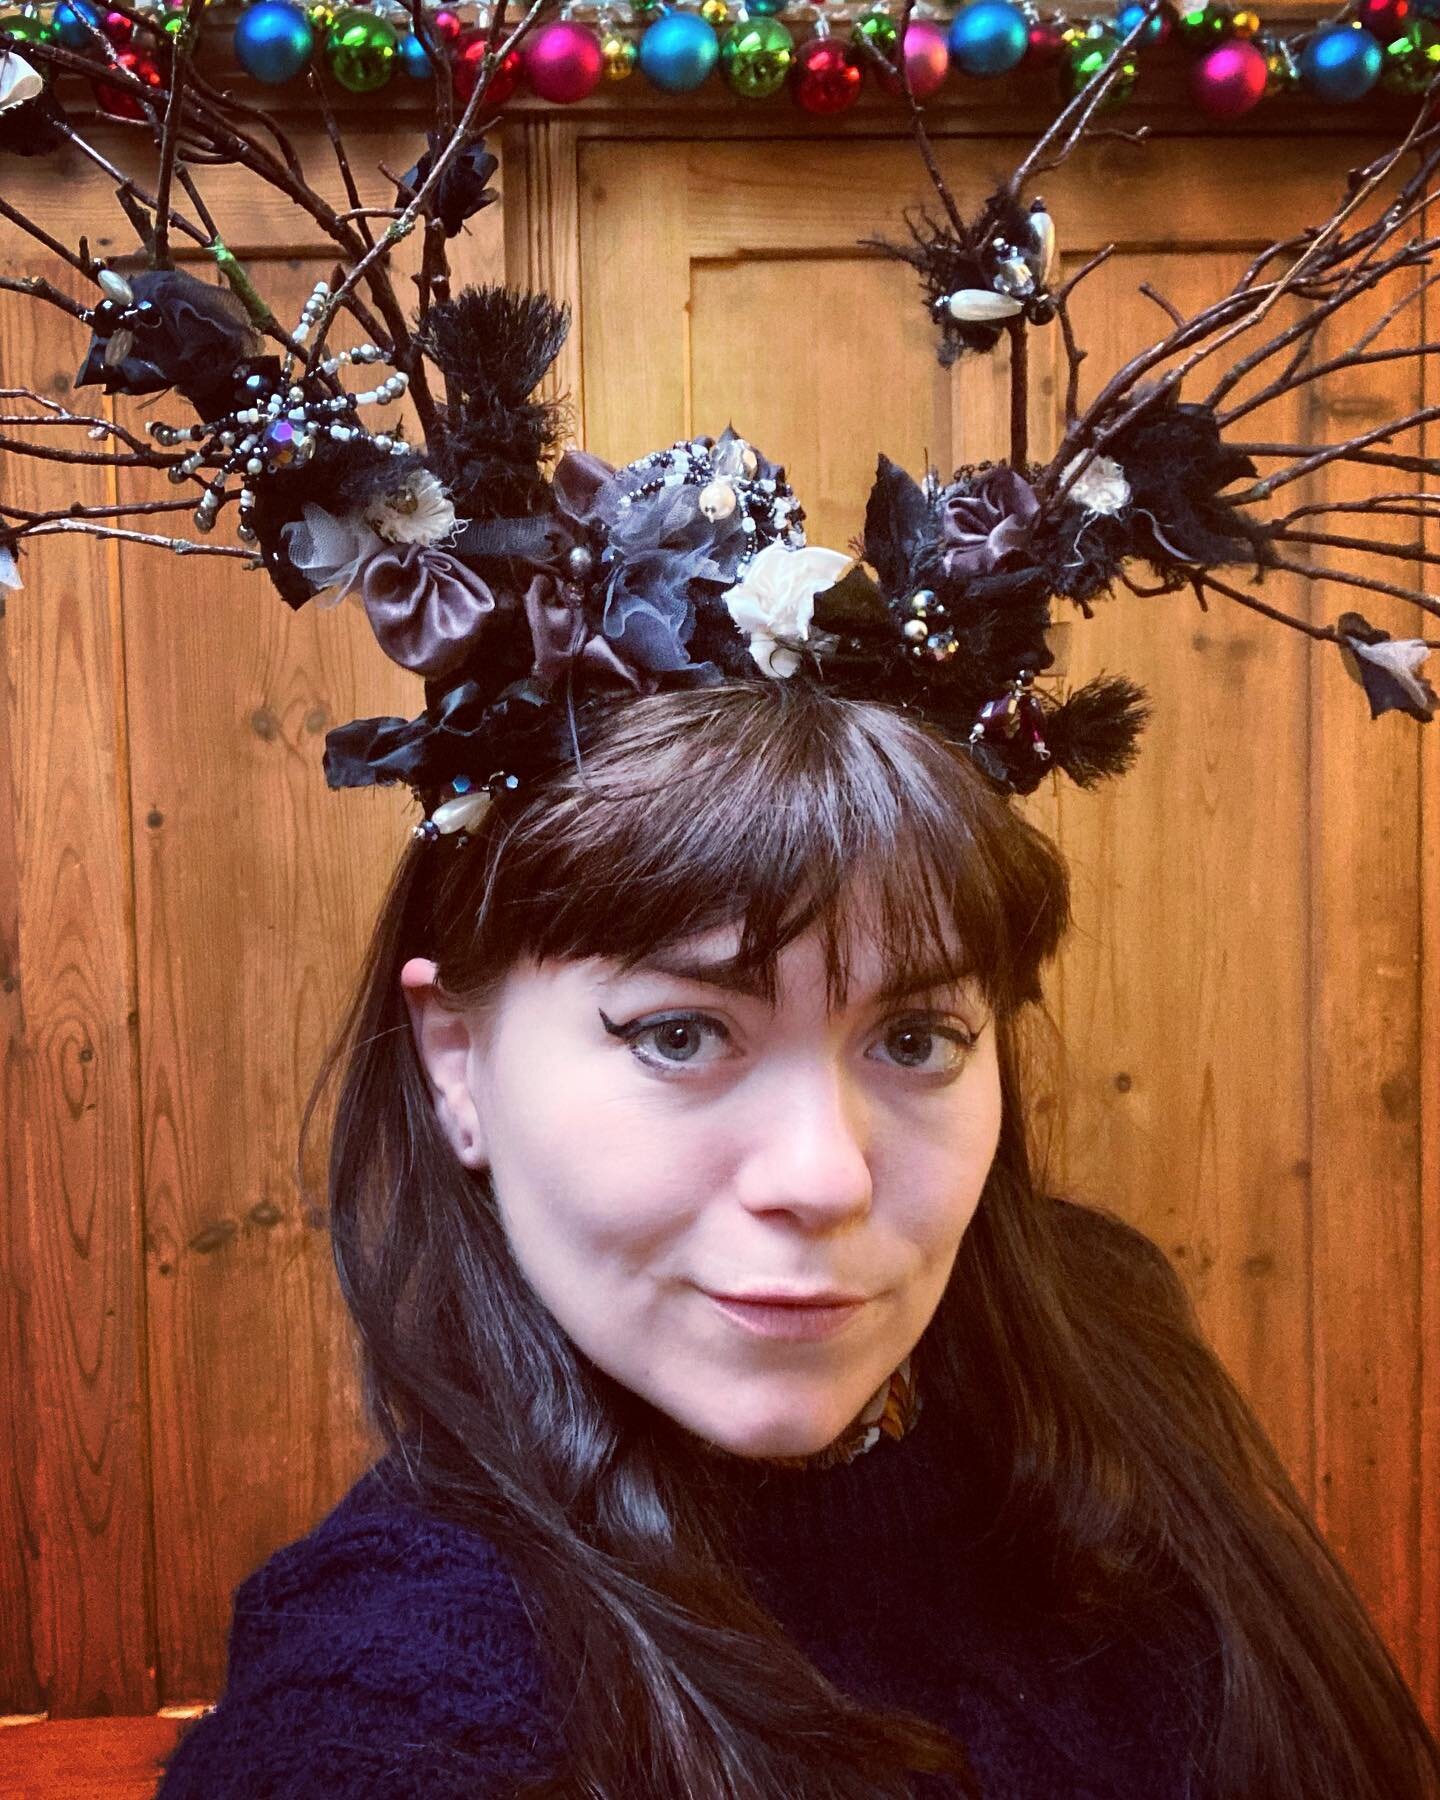 Just testing out this headpiece&hellip; 😉 

Amy&rsquo;s showstopping gothic woodland crown was every bit as magical to try on as it was to create! 🕷 I thought I&rsquo;d share this fun snap this morning- but in all seriousness, I cannot wait to see 